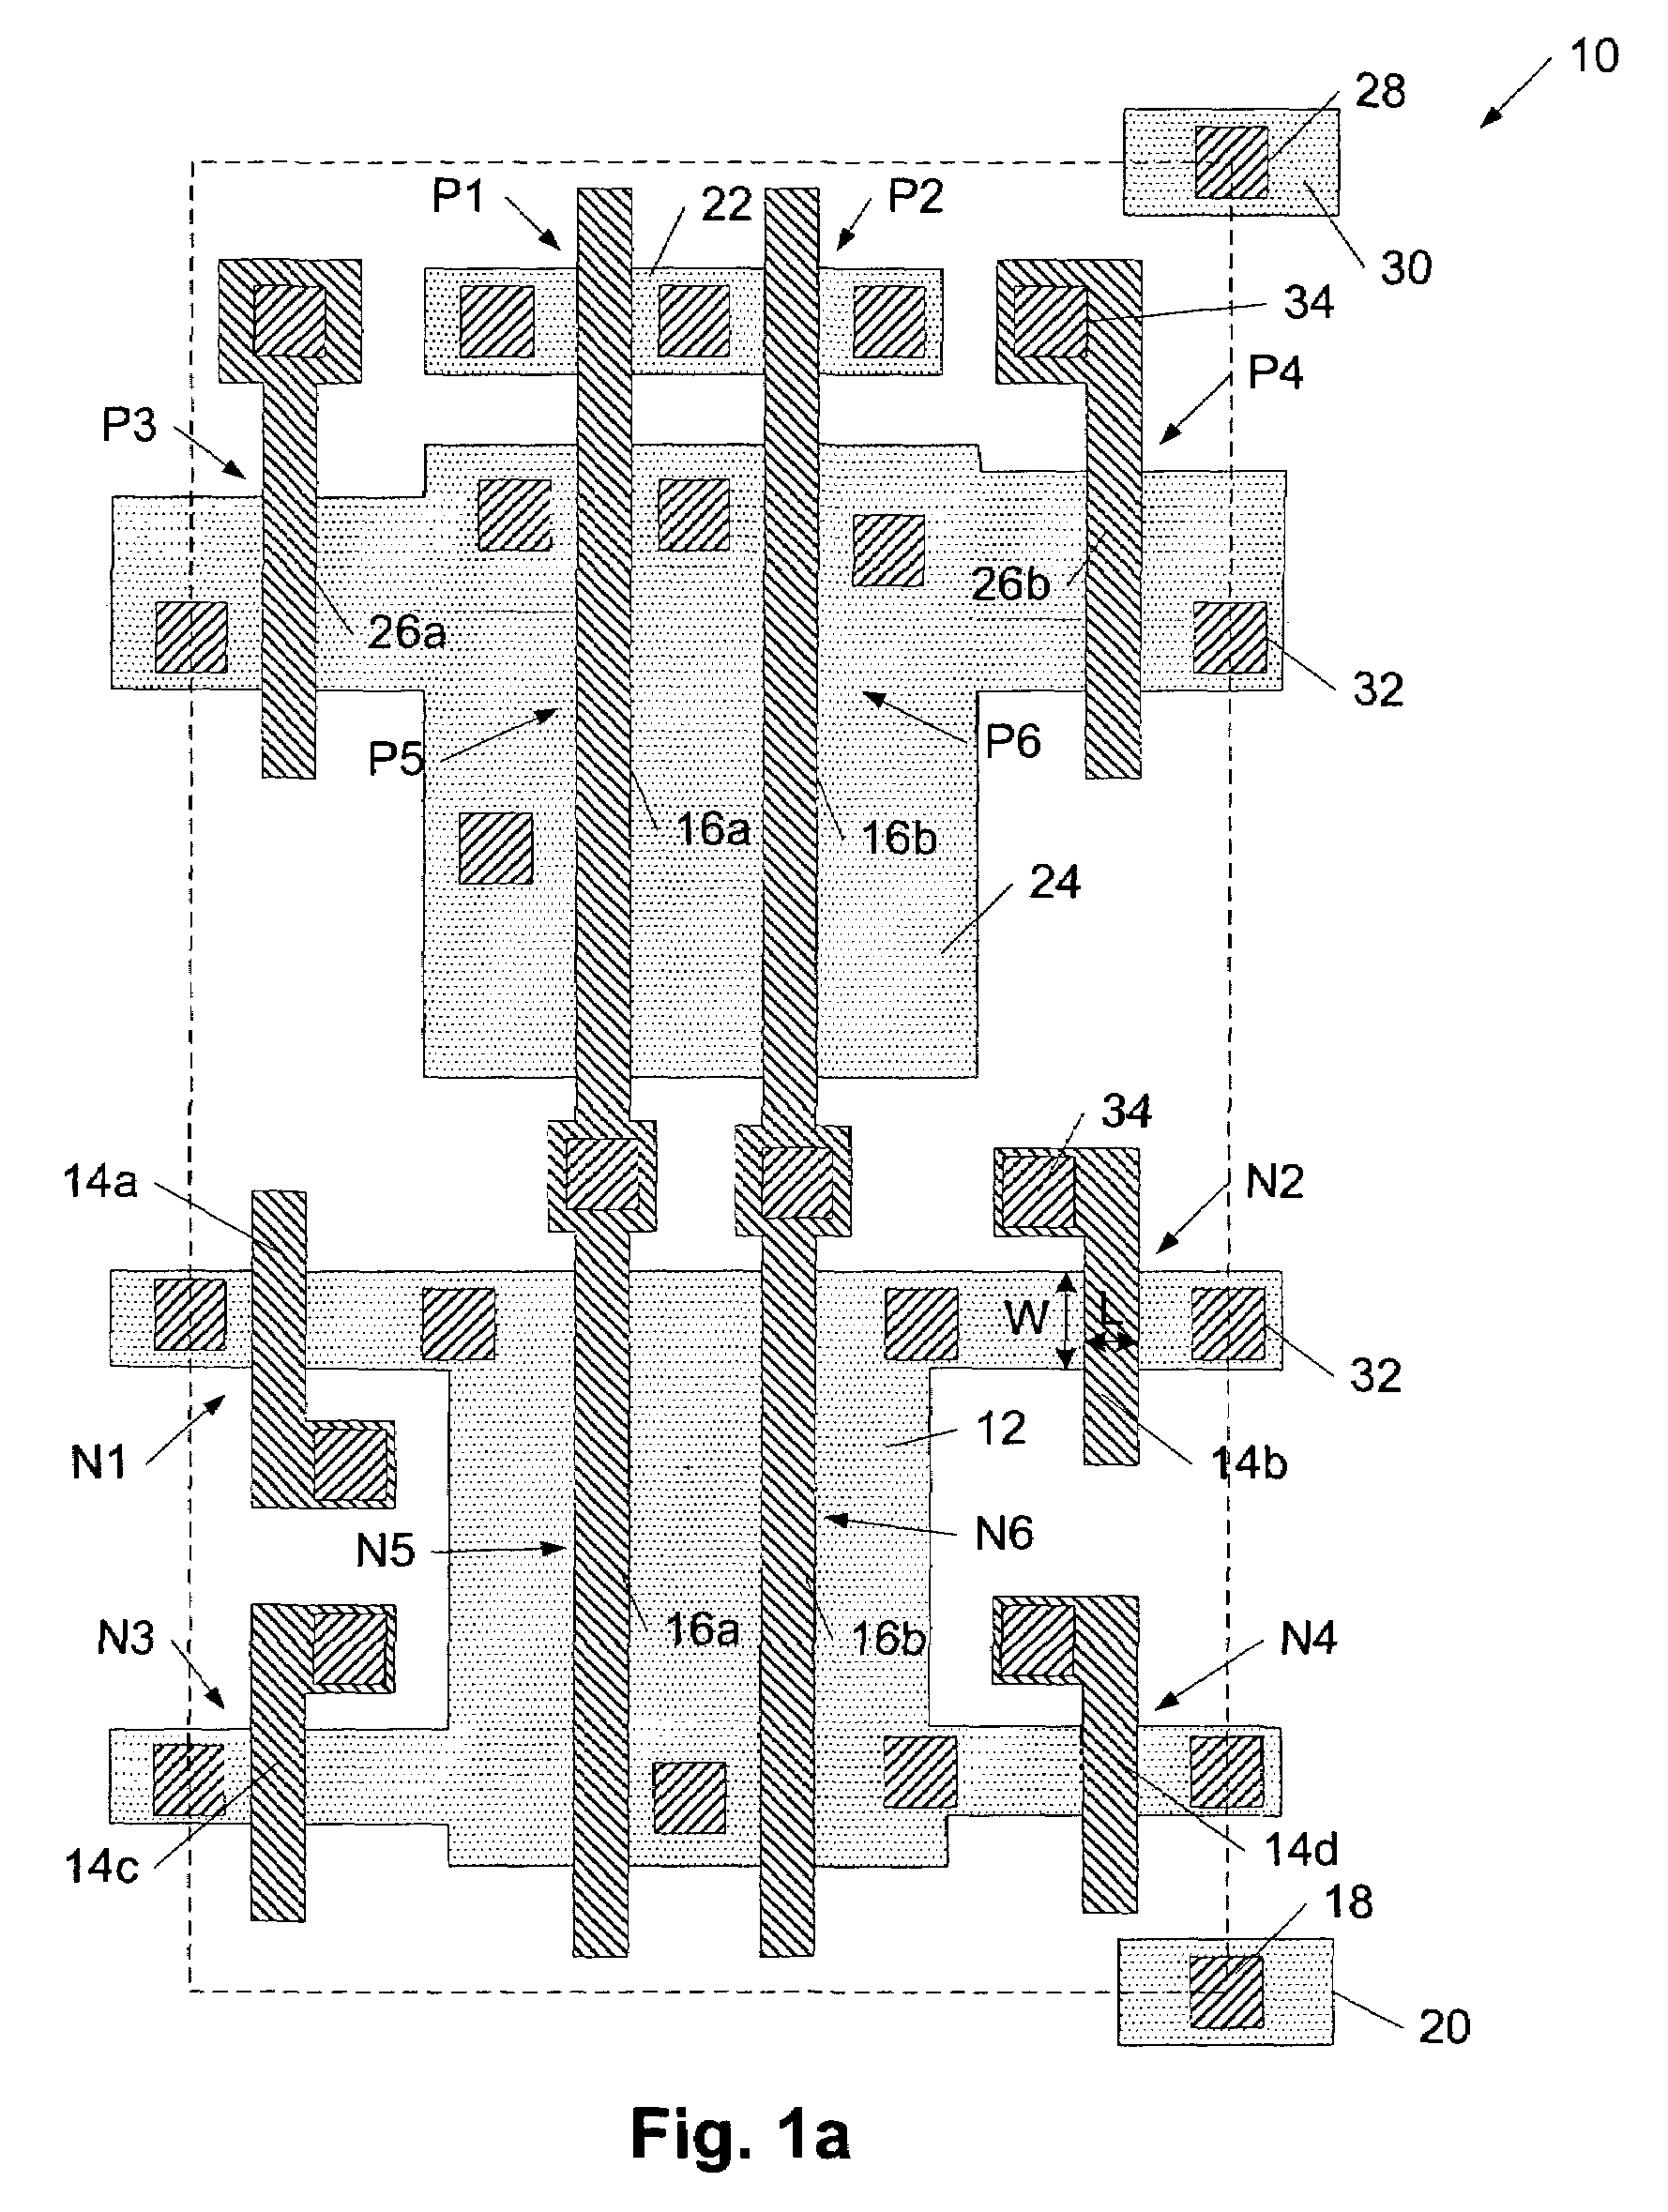 Basic cell architecture for structured application-specific integrated circuits